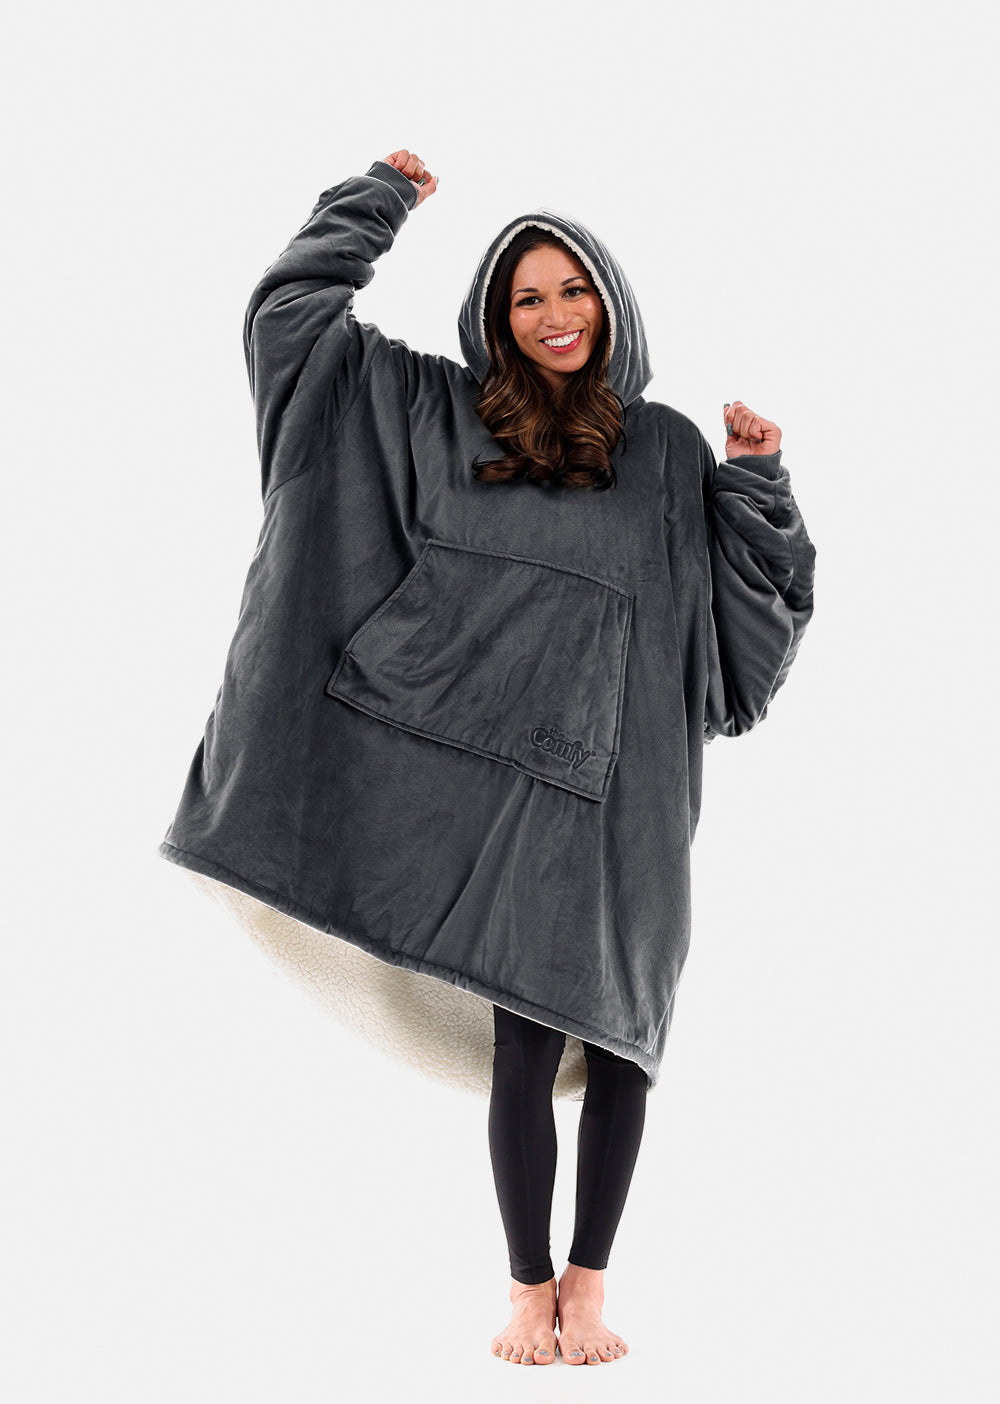  THE COMFY Original Elf Costume Wearable Blanket for Women and  Men, Oversized Microfiber and Sherpa Blankets As Seen On Shark Tank : Home  & Kitchen